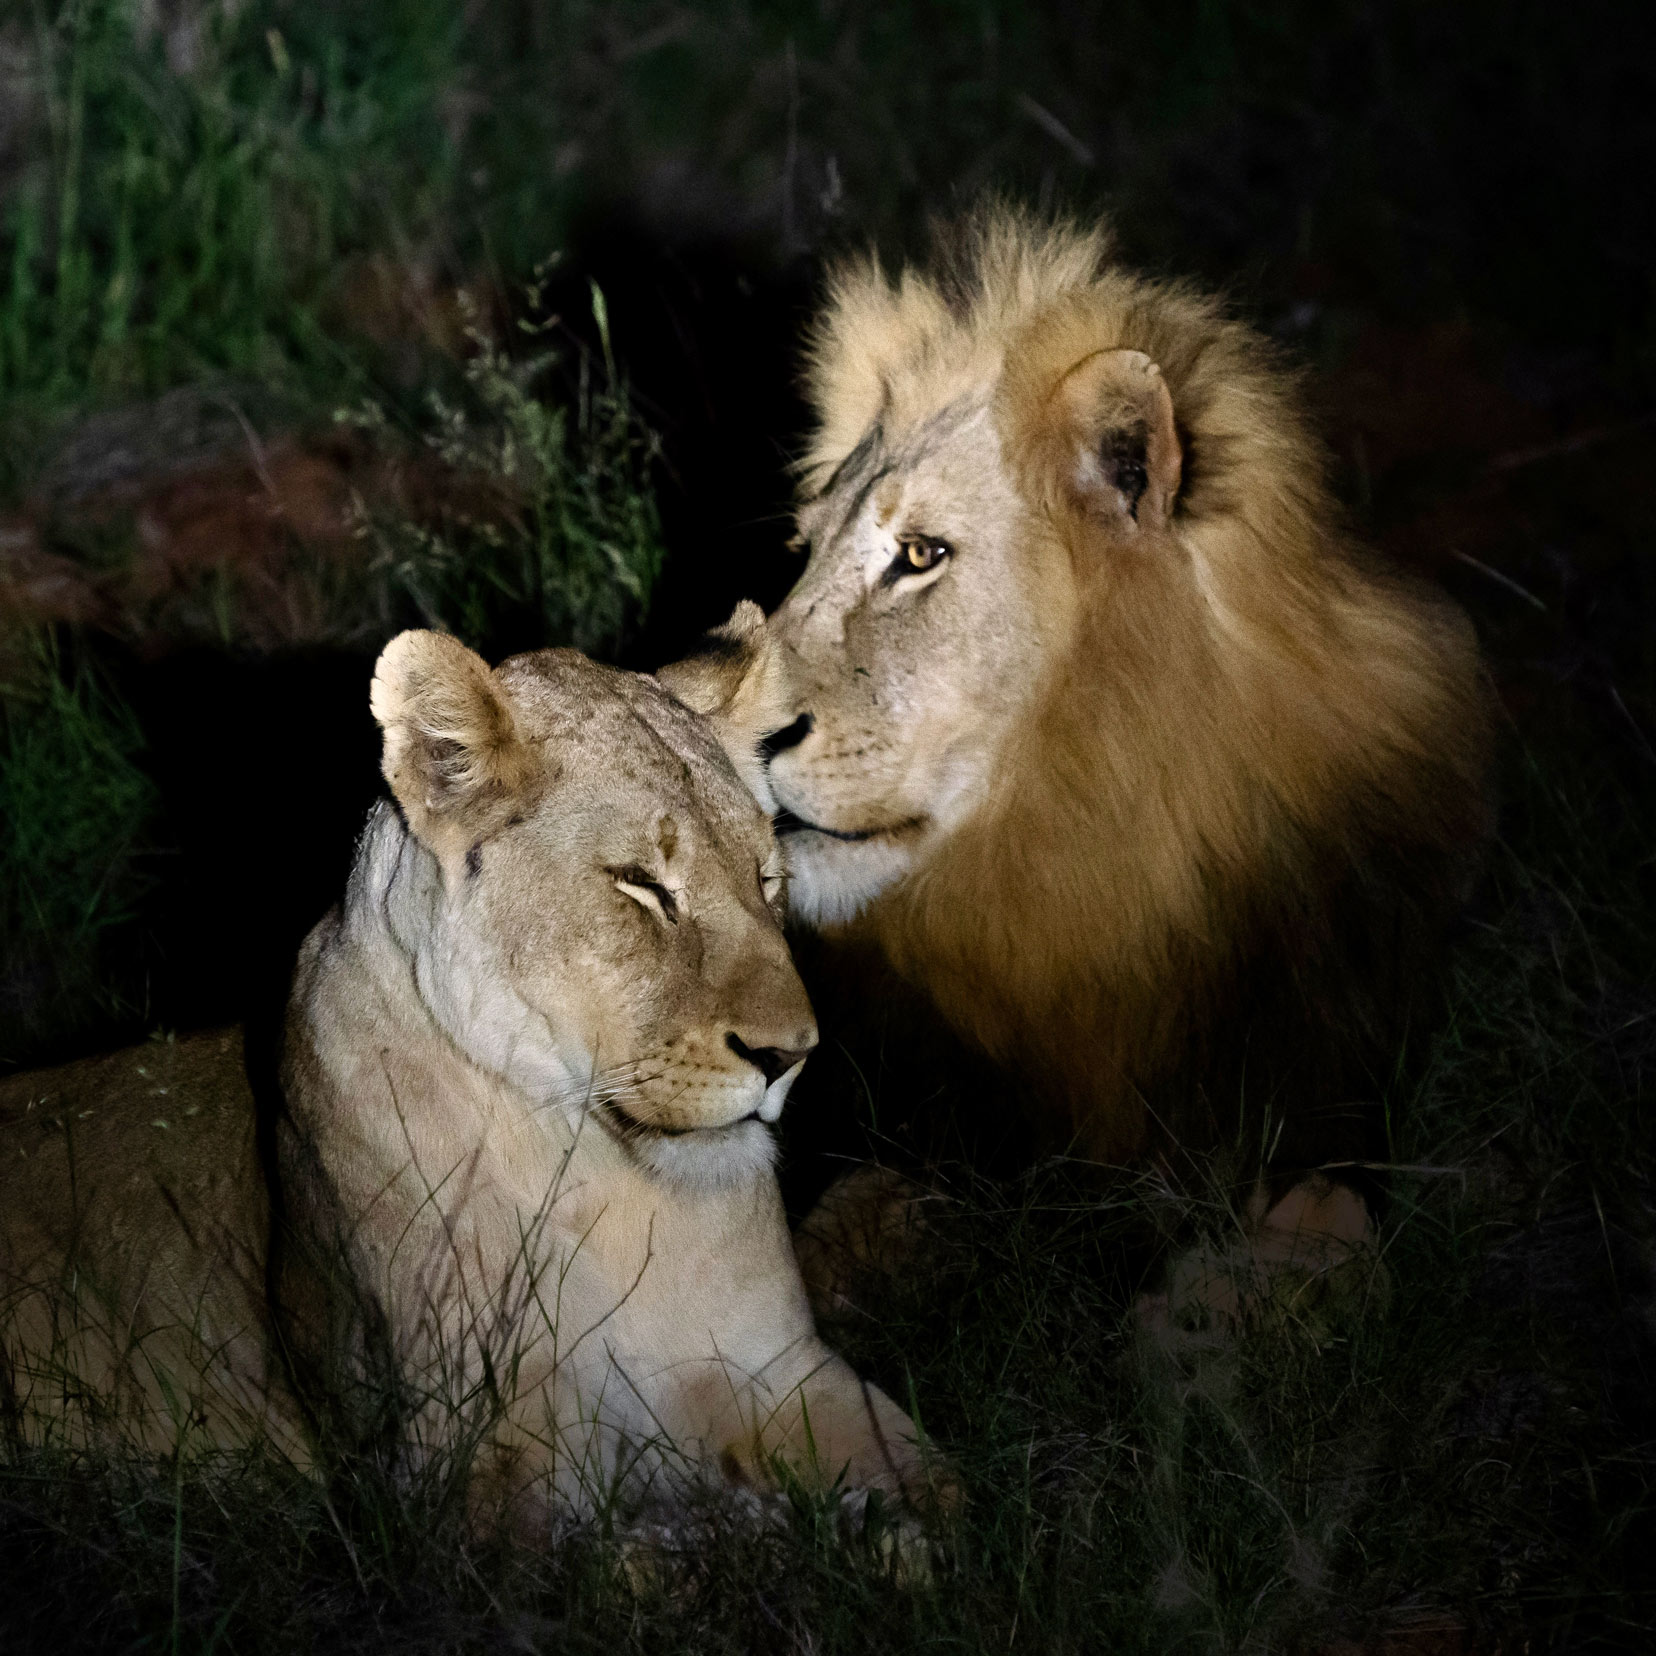 Female and male lion at night with faces next to each other